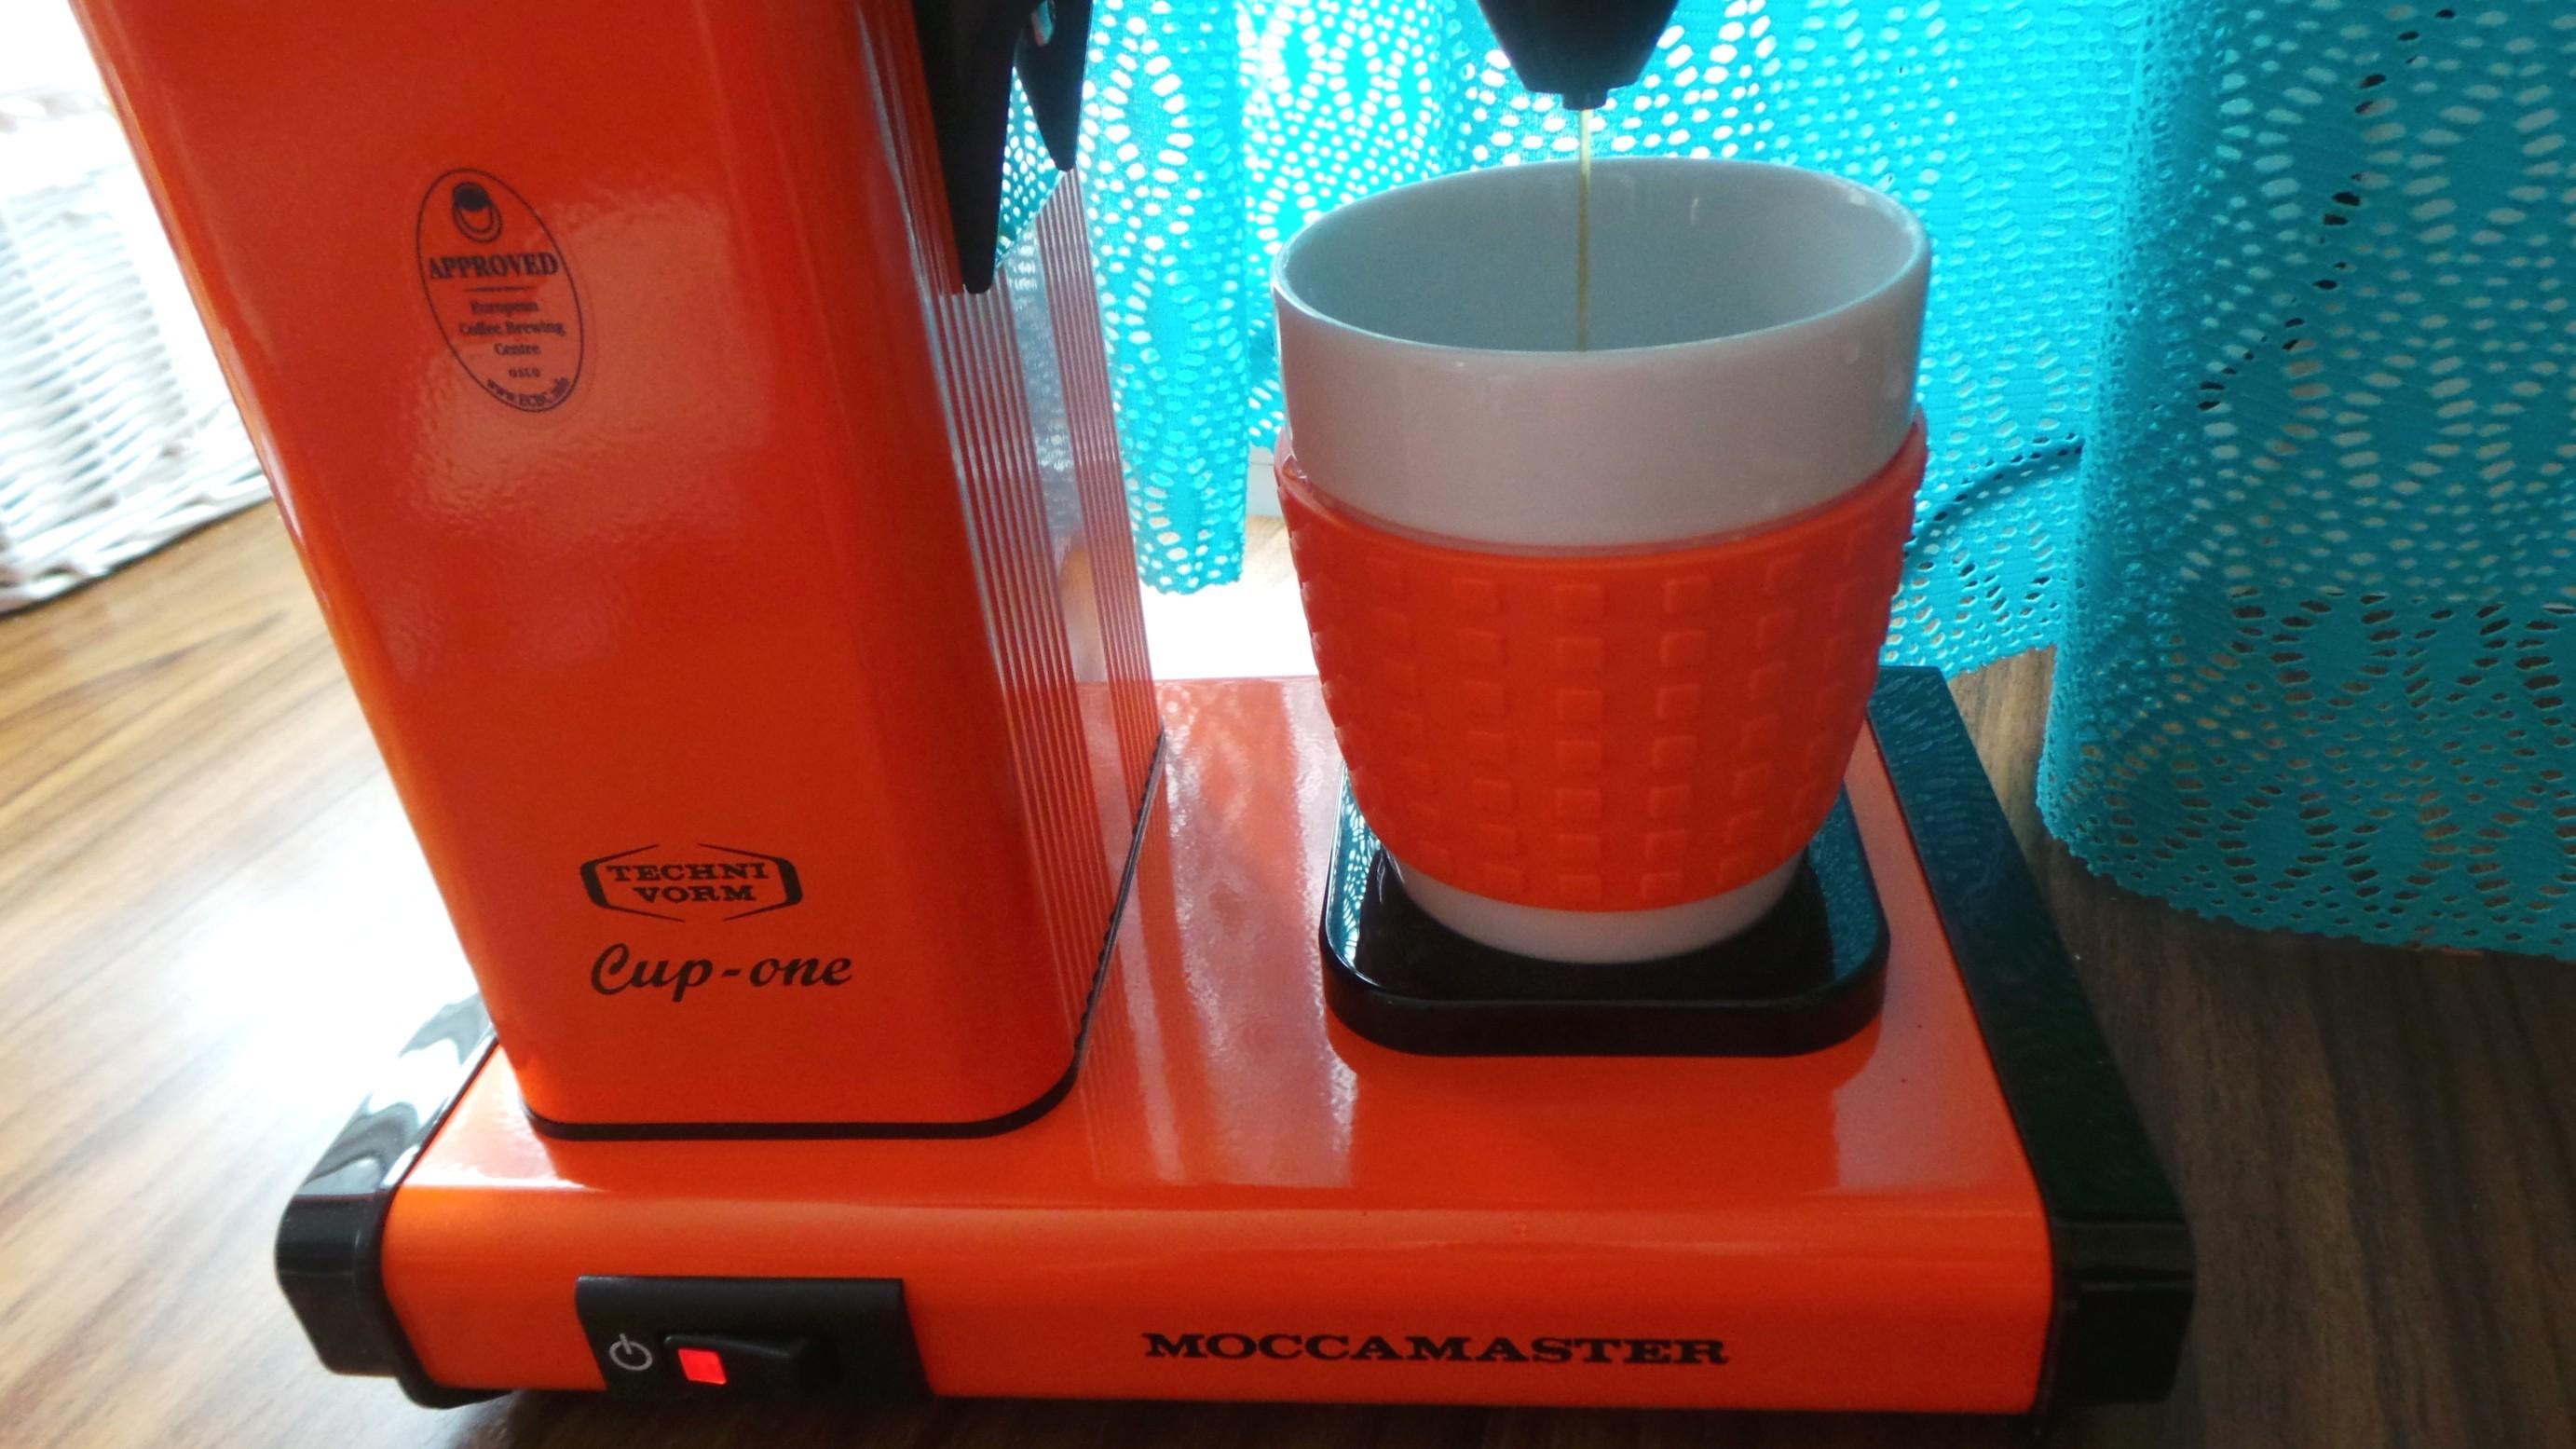 moccamaster cup one